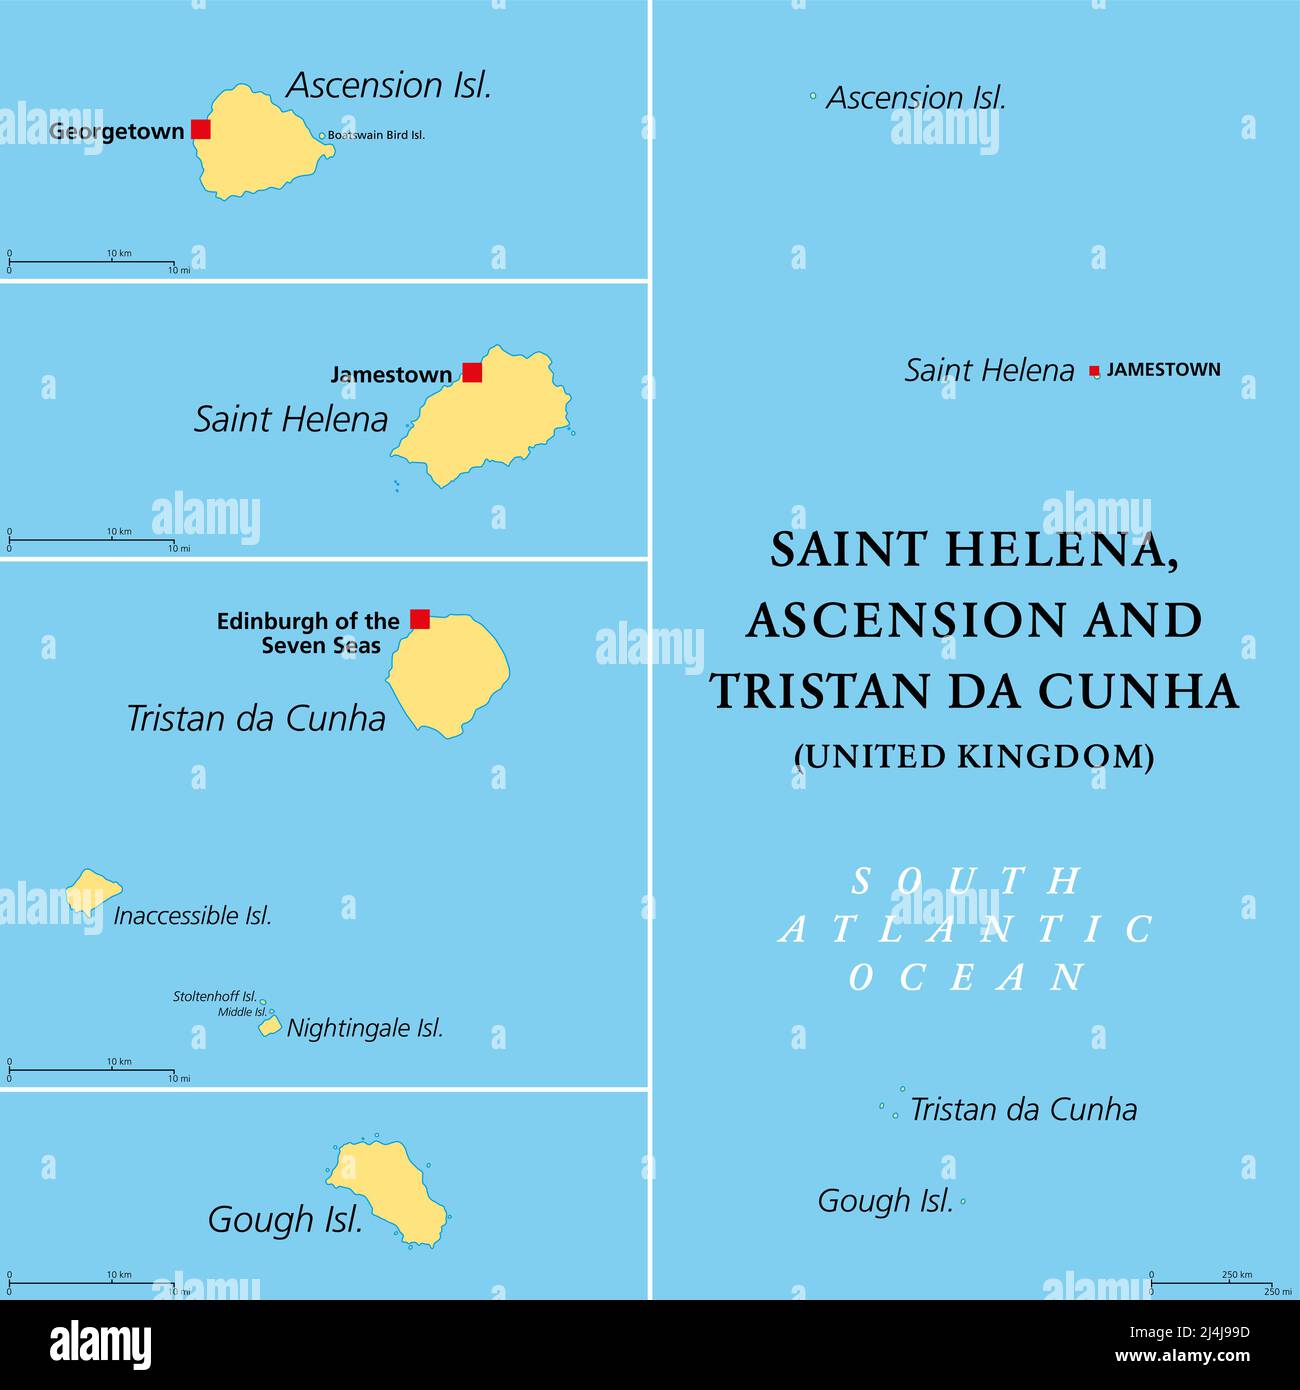 Saint Helena, Ascension and Tristan da Cunha, political map. British Overseas Territory in the South Atlantic, with capital Jamestown. Stock Photo